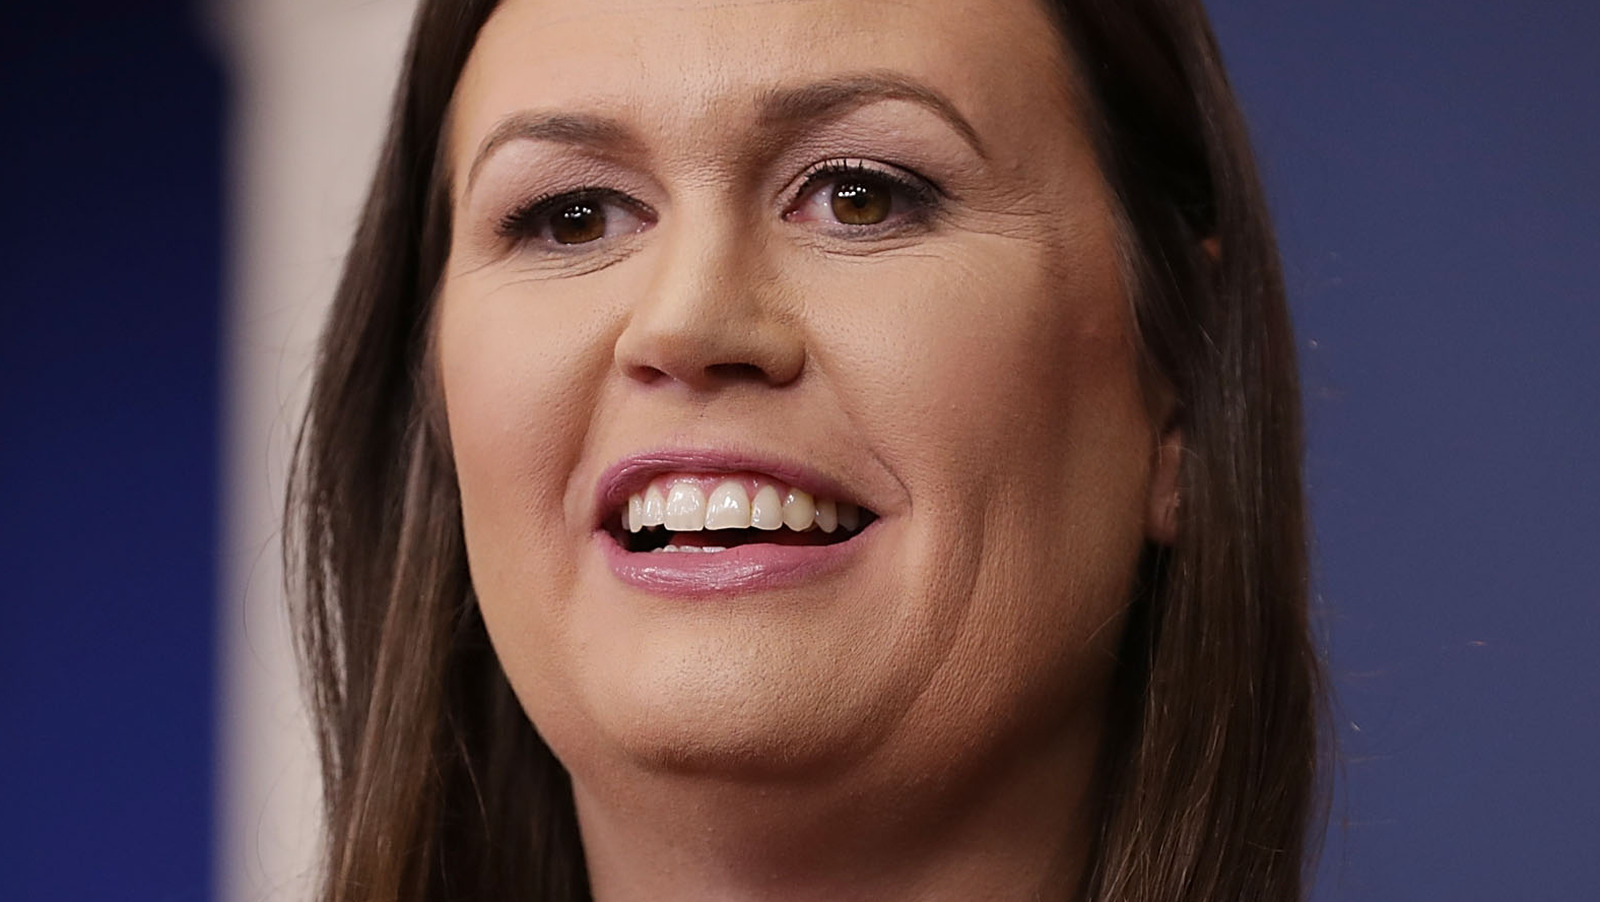 The Transformation Of Sarah Huckabee Sanders From Child To 38 Years Old